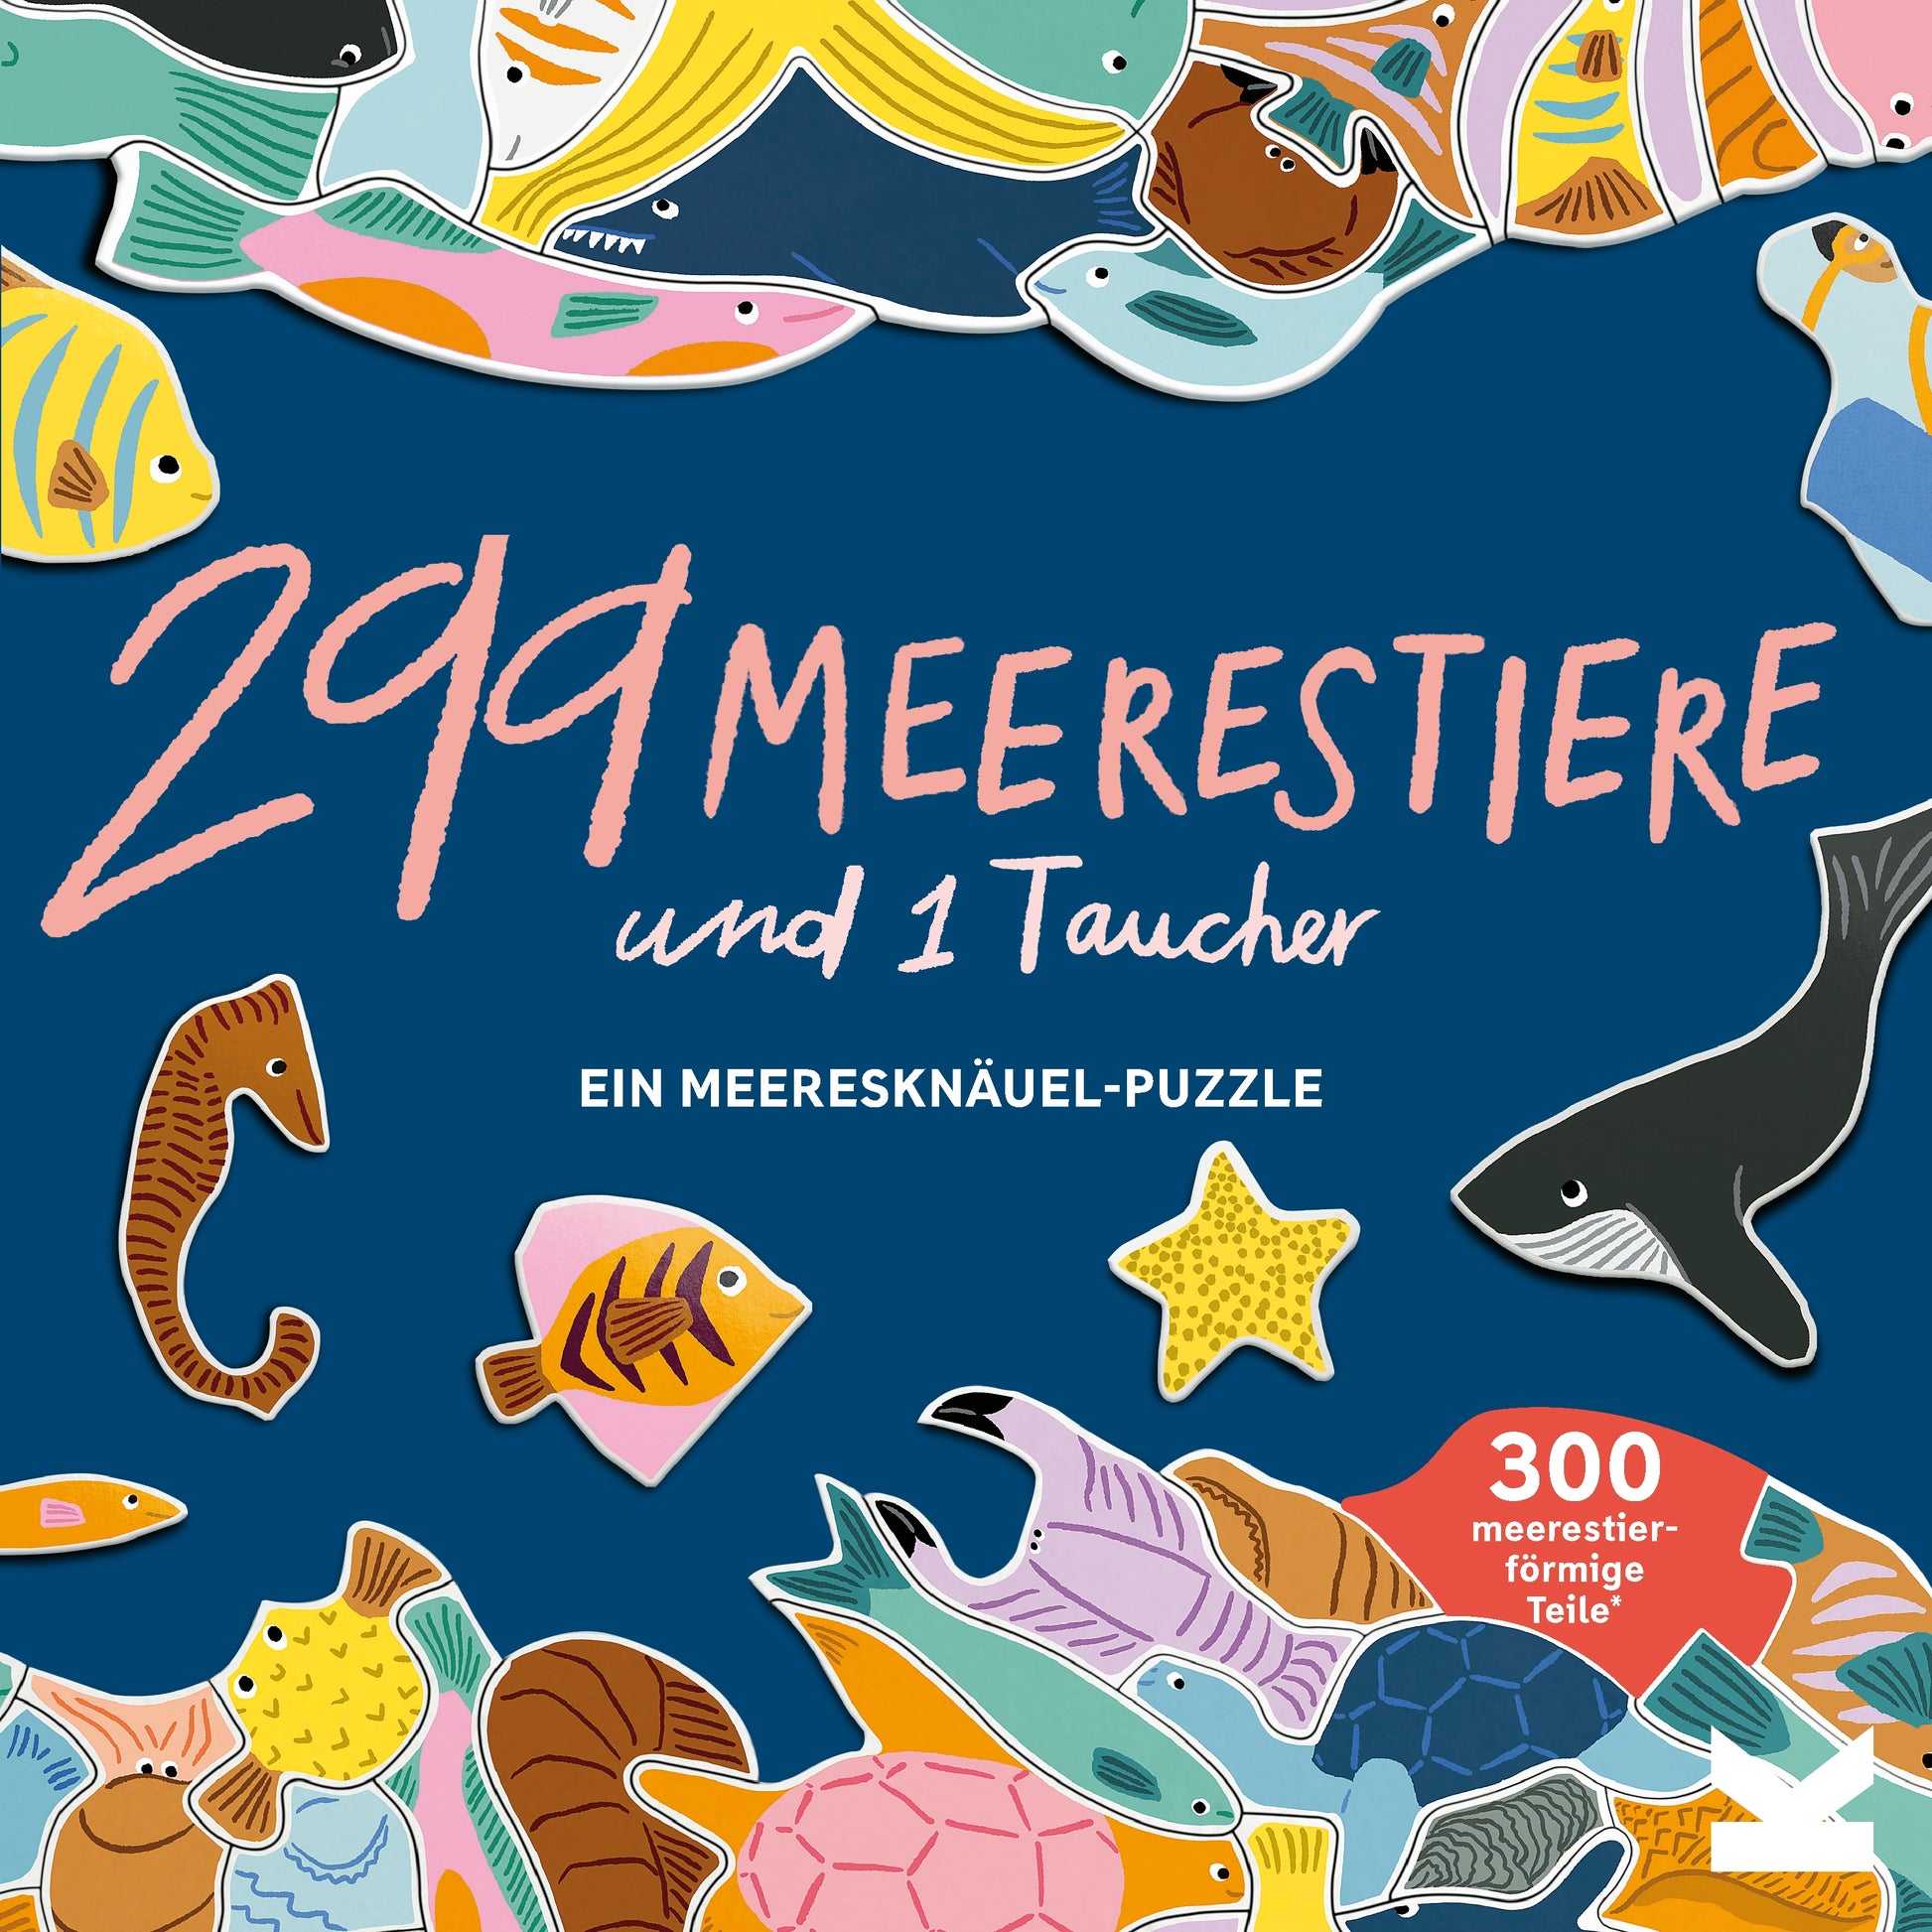 299 Meerestiere und 1 Taucher by Léa Maupetit, Anne Vogel-Ropers, Laurence King Publishing